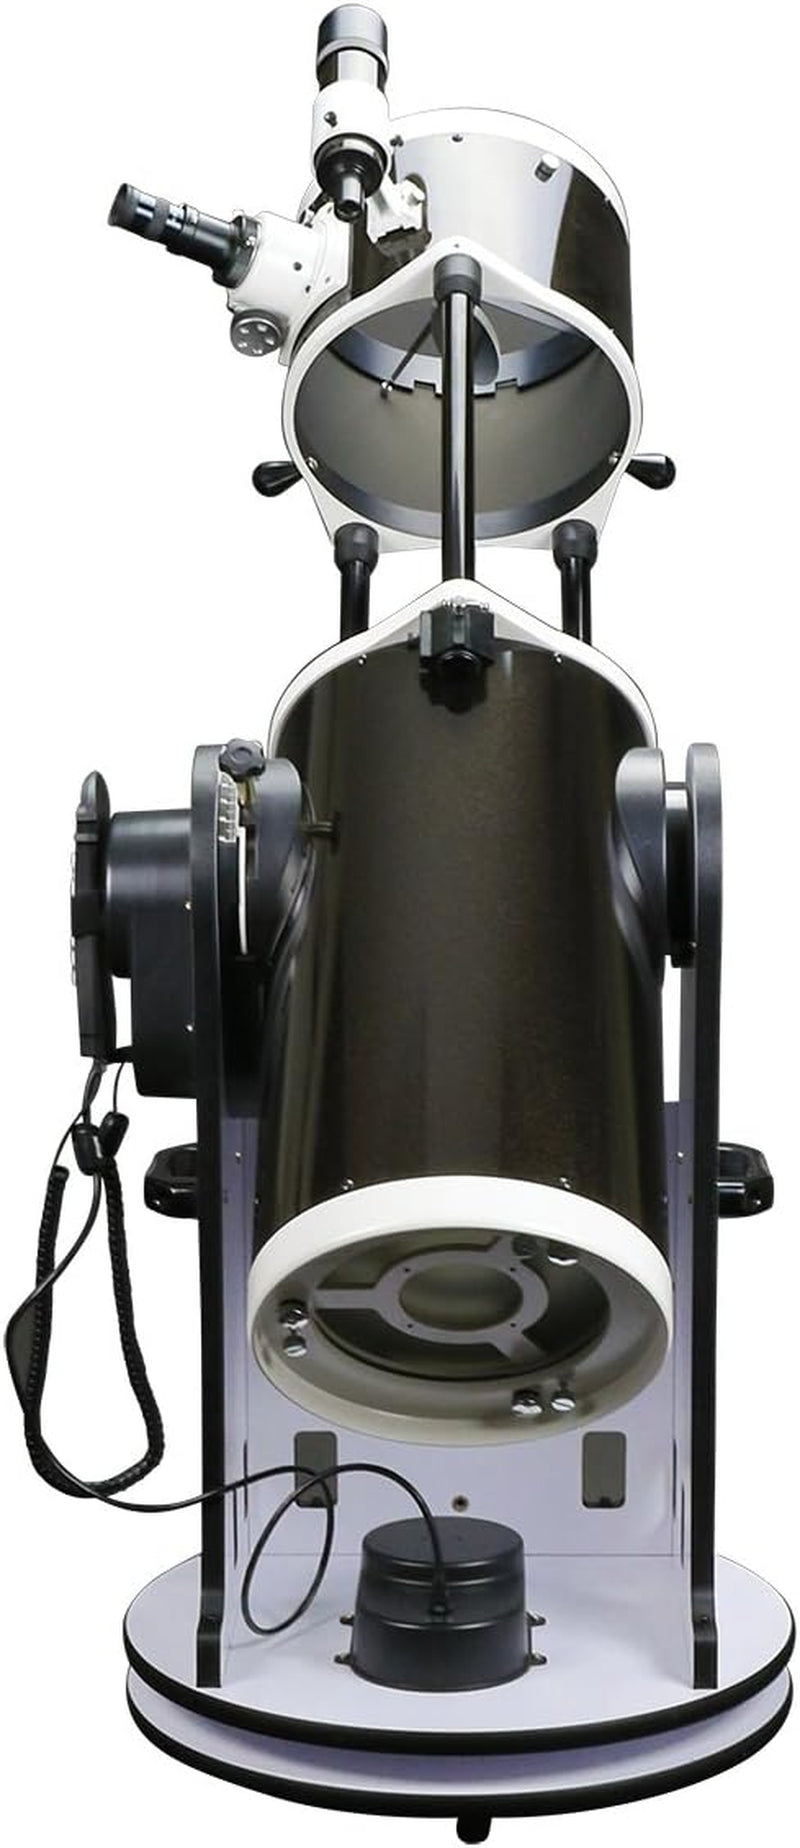 Flextube 250 Synscan Dobsonian 10-Inch Collapsible Computerized Goto Large Aperture Telescope, White, (S11810)